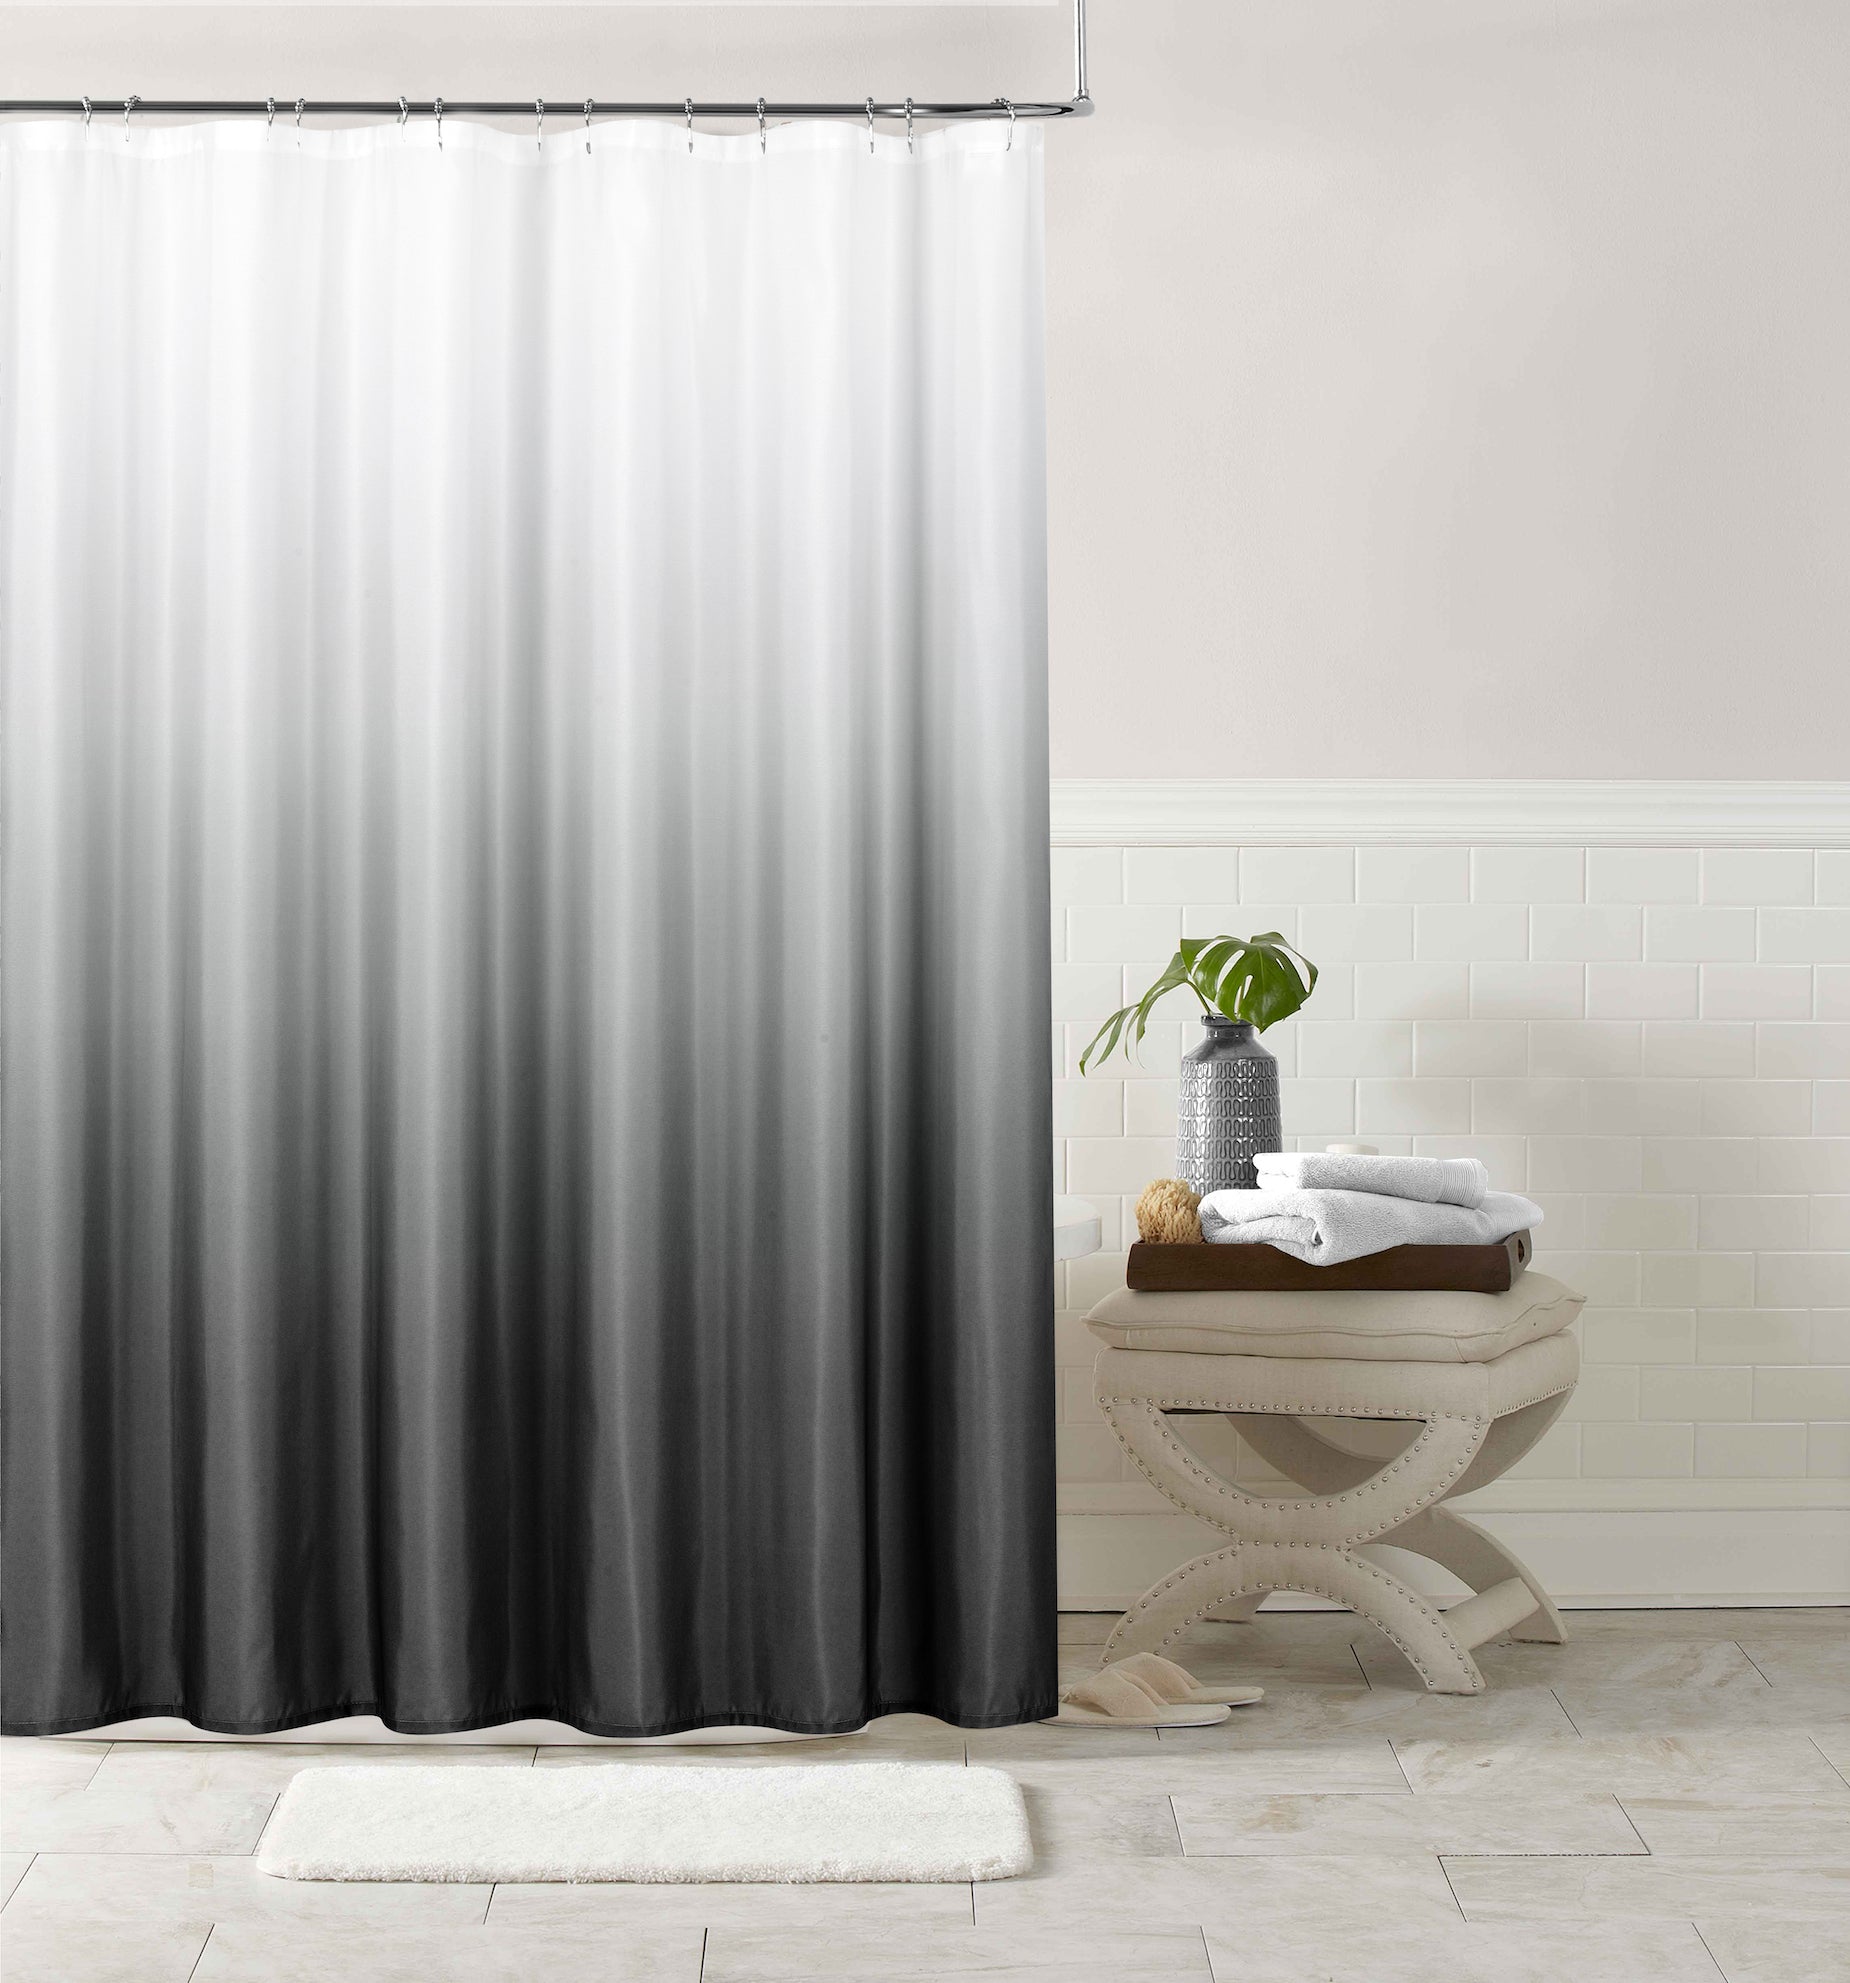 Dainty Home Shades Printed Fabric 3D Textured Gradient Colors Ombre Designed Fabric Shower Curtain 70" x 72"